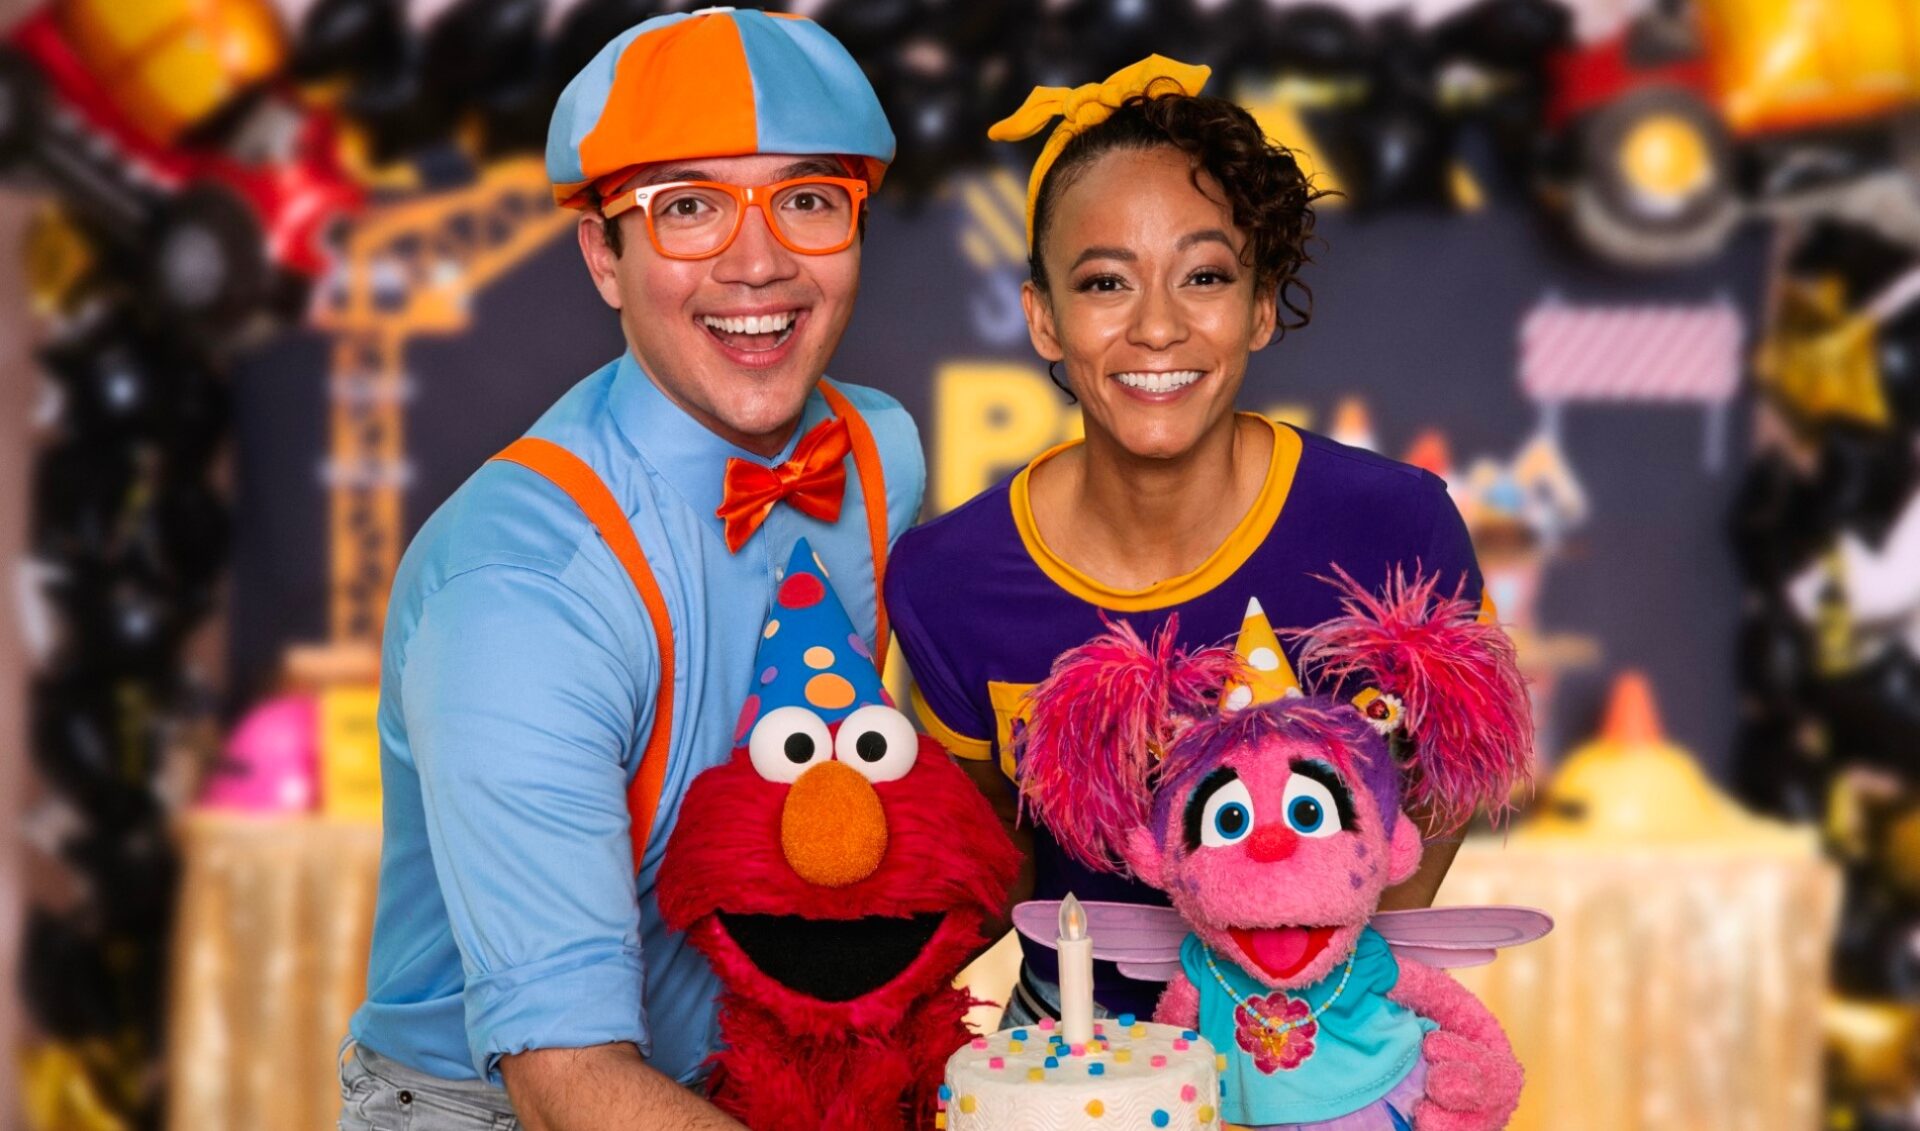 Blippi is collaborating with Big Bird and Elmo thanks to a Sesame Street partnership